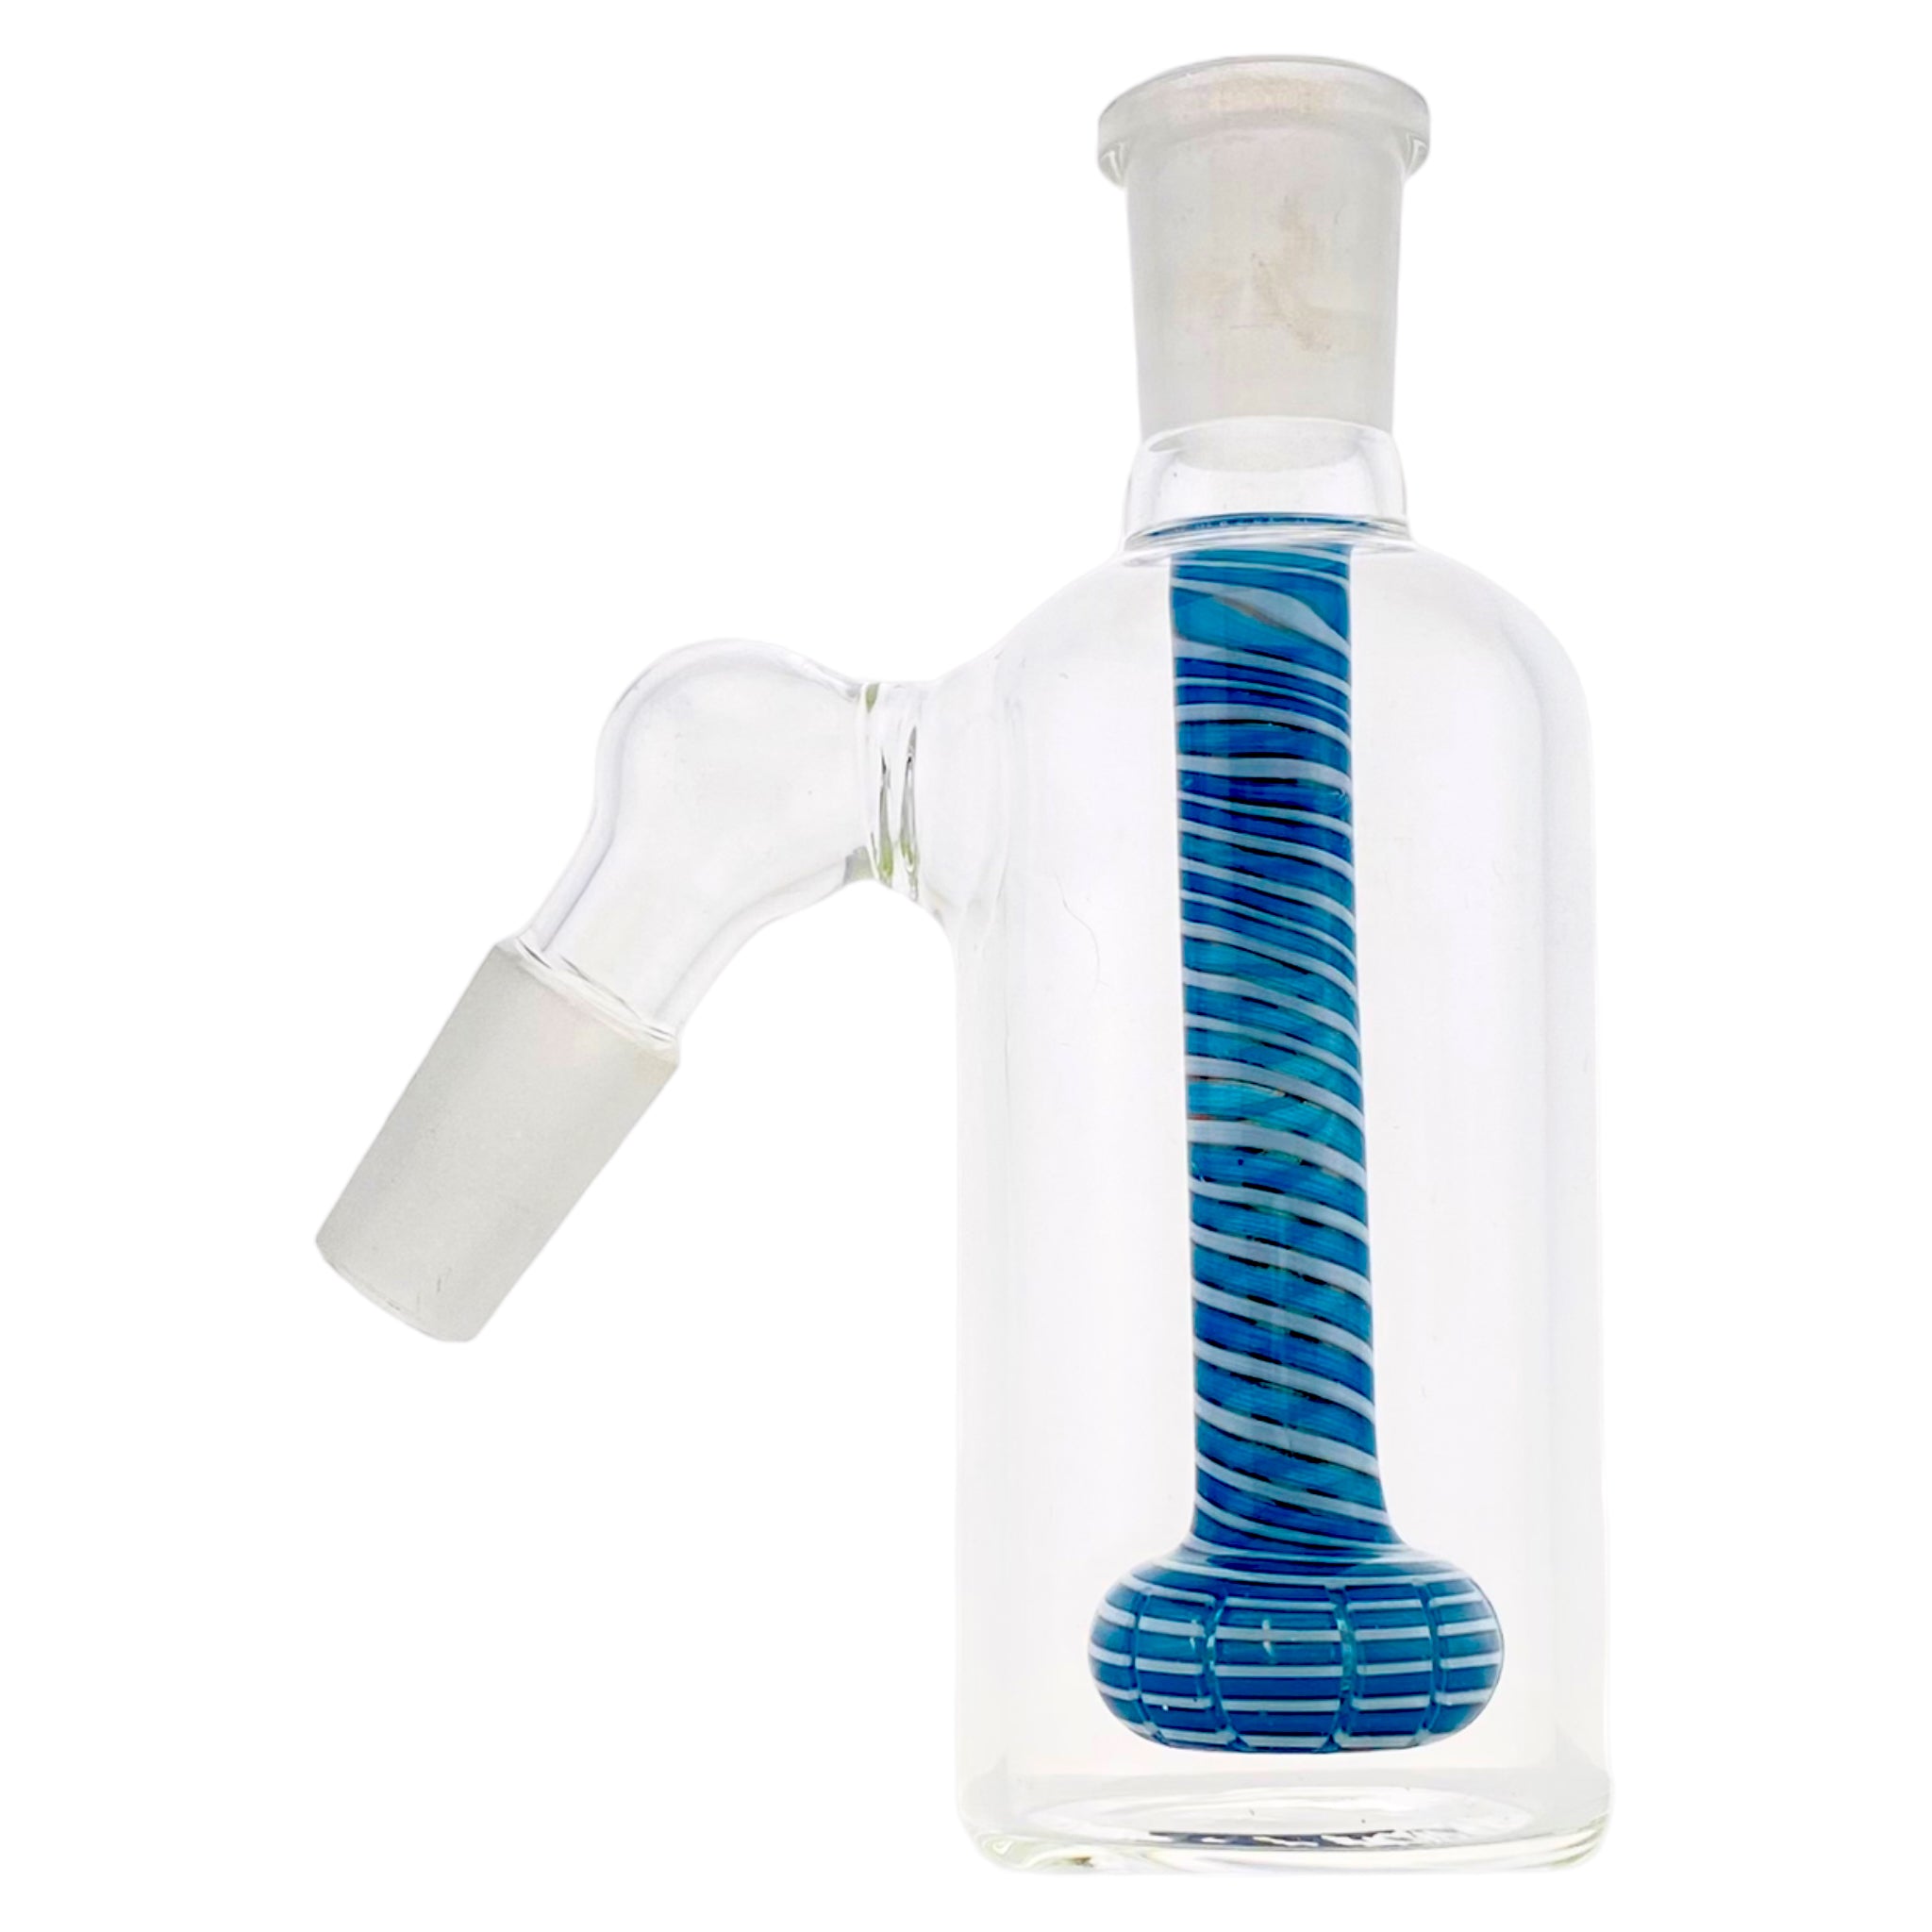 14mm Ash Catcher With 45 Degree Joint And Blue Twist Showerhead Perc